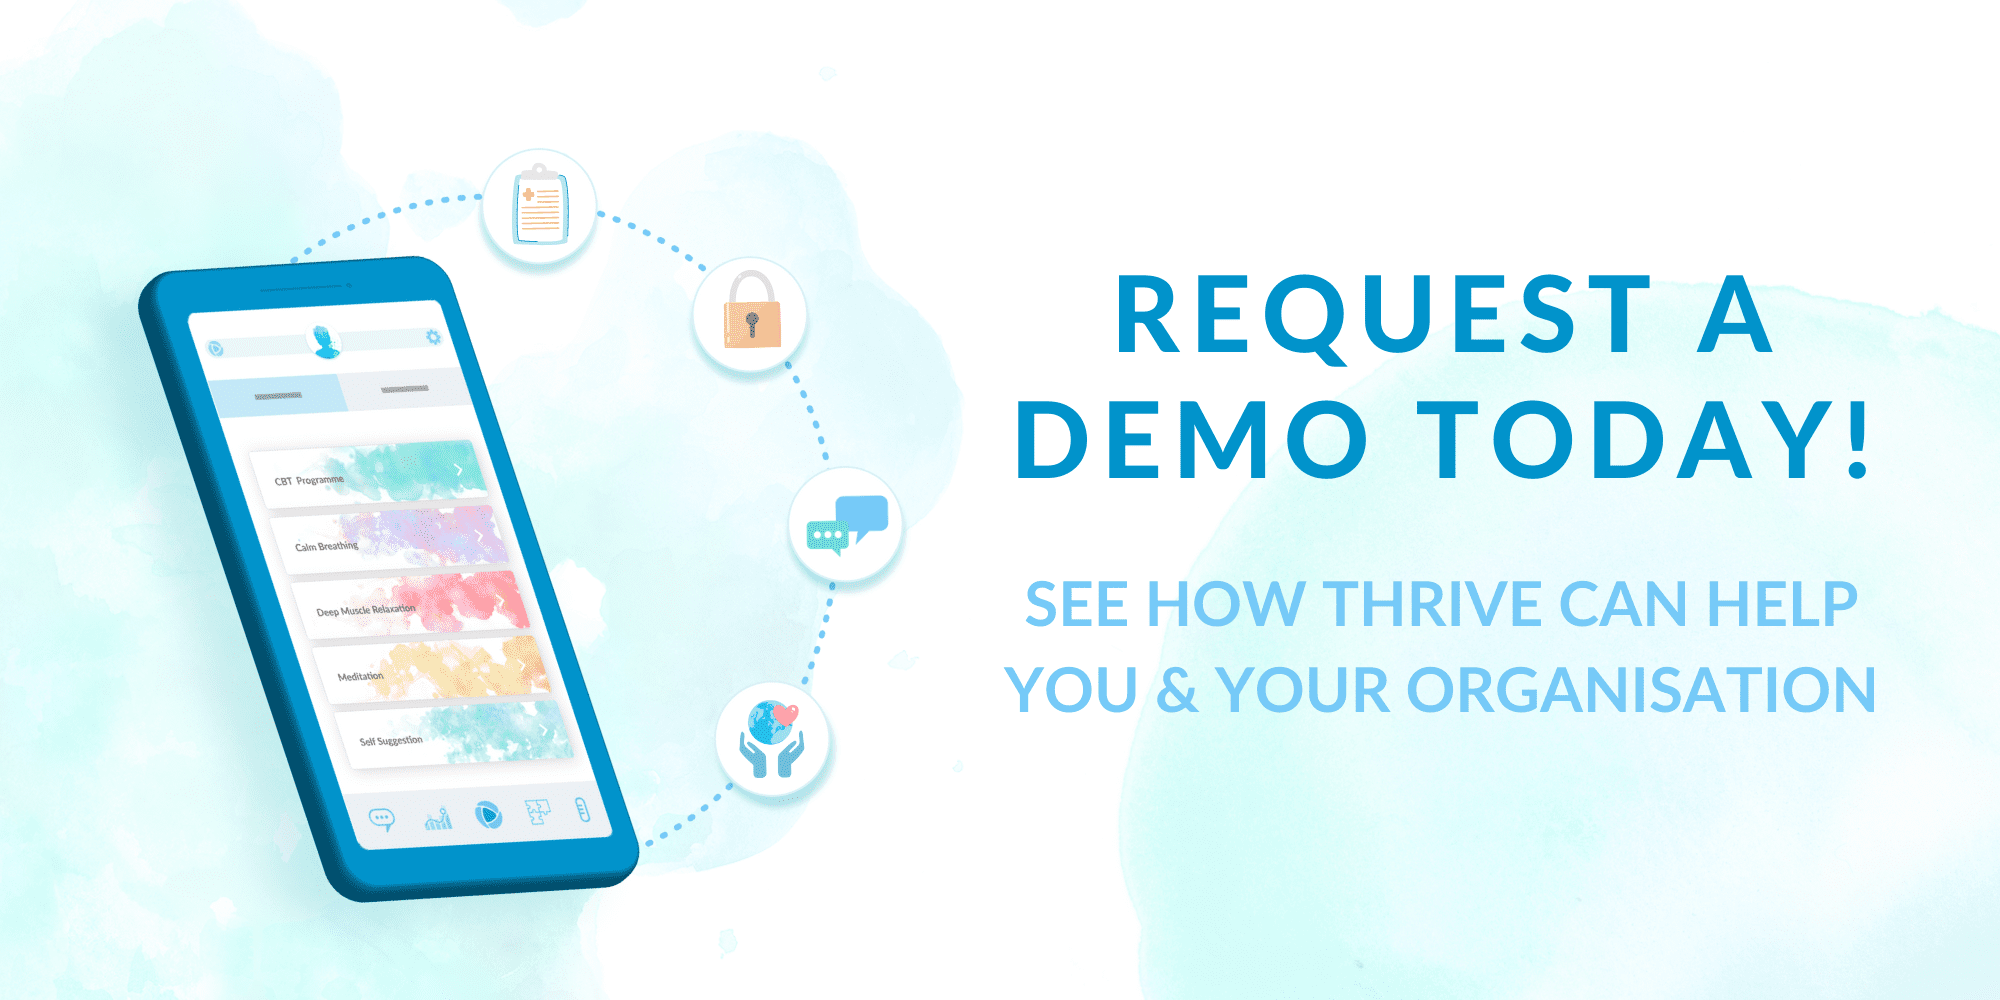 Request A Demo Banner. Click here to contact us today and request a demo of our mental health app